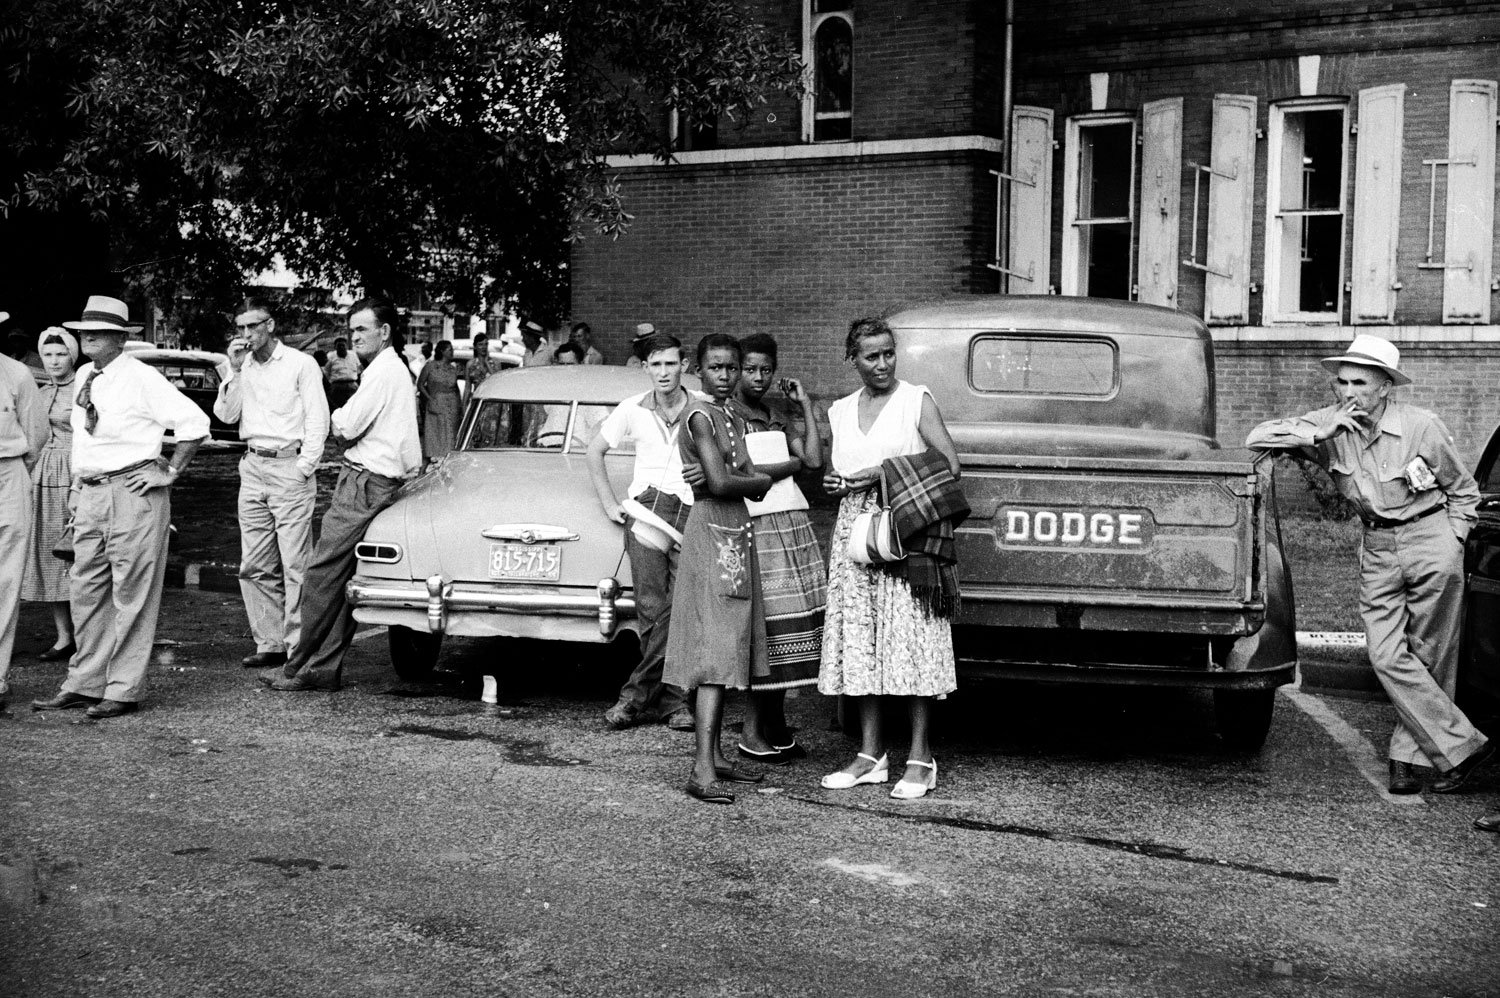 A crowd outside the Sumner, Miss., courthouse during the trial of Roy Bryant and J.W. Milam for the kidnapping and murder of 14-year-old Emmett Till.